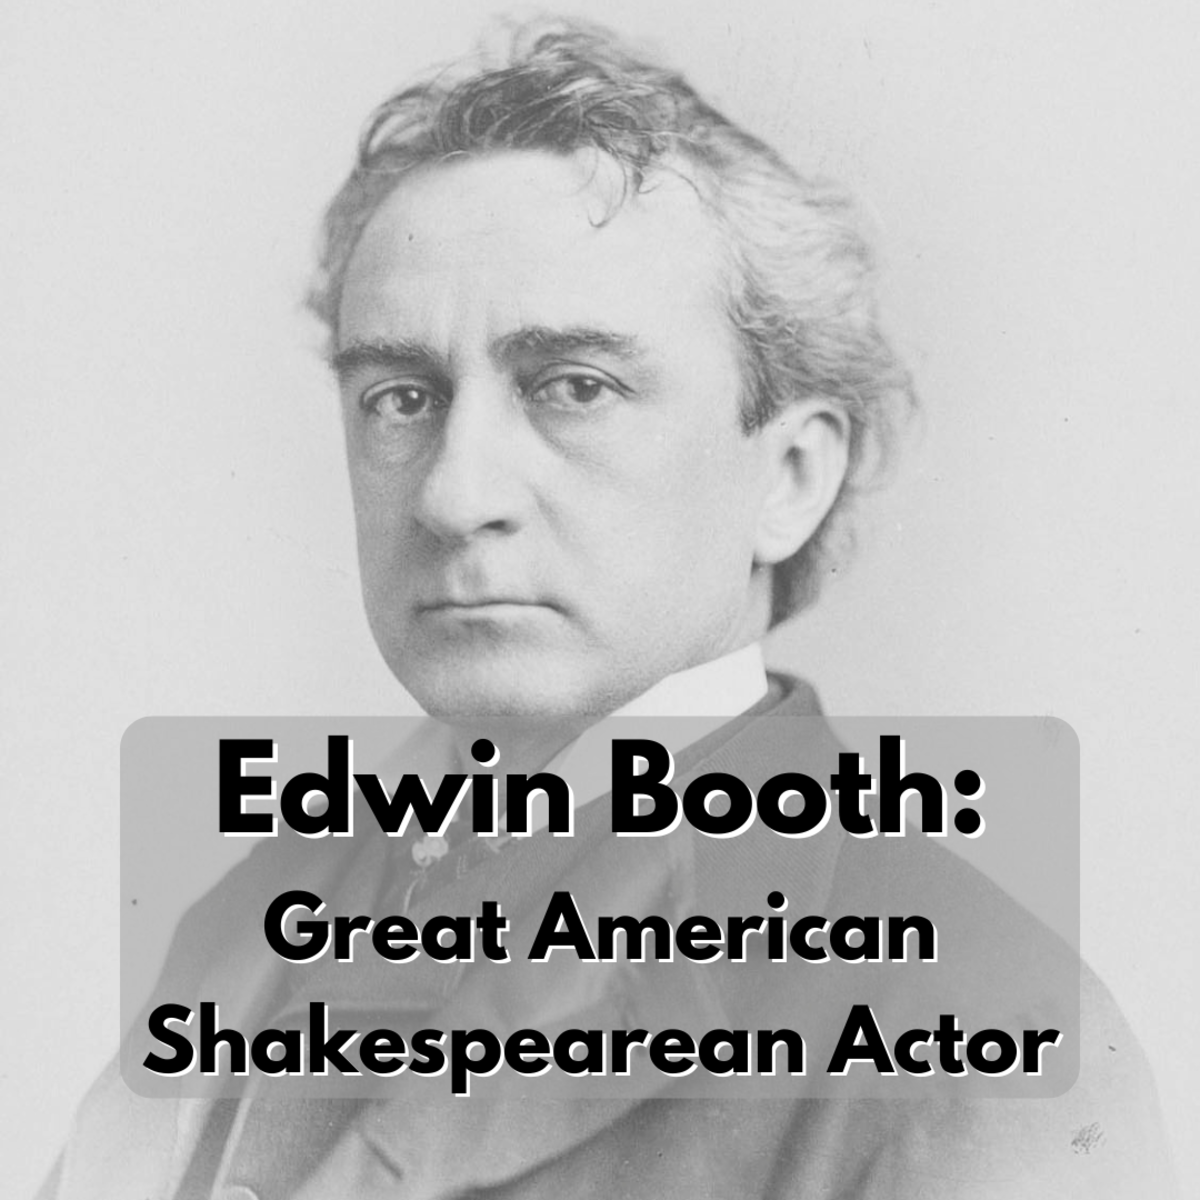 Who was Edwin Booth? Not only was he one of 19th-century America's most prominent actors, but he was also the brother of John Wilkes Booth, the assassin of Abraham Lincoln.